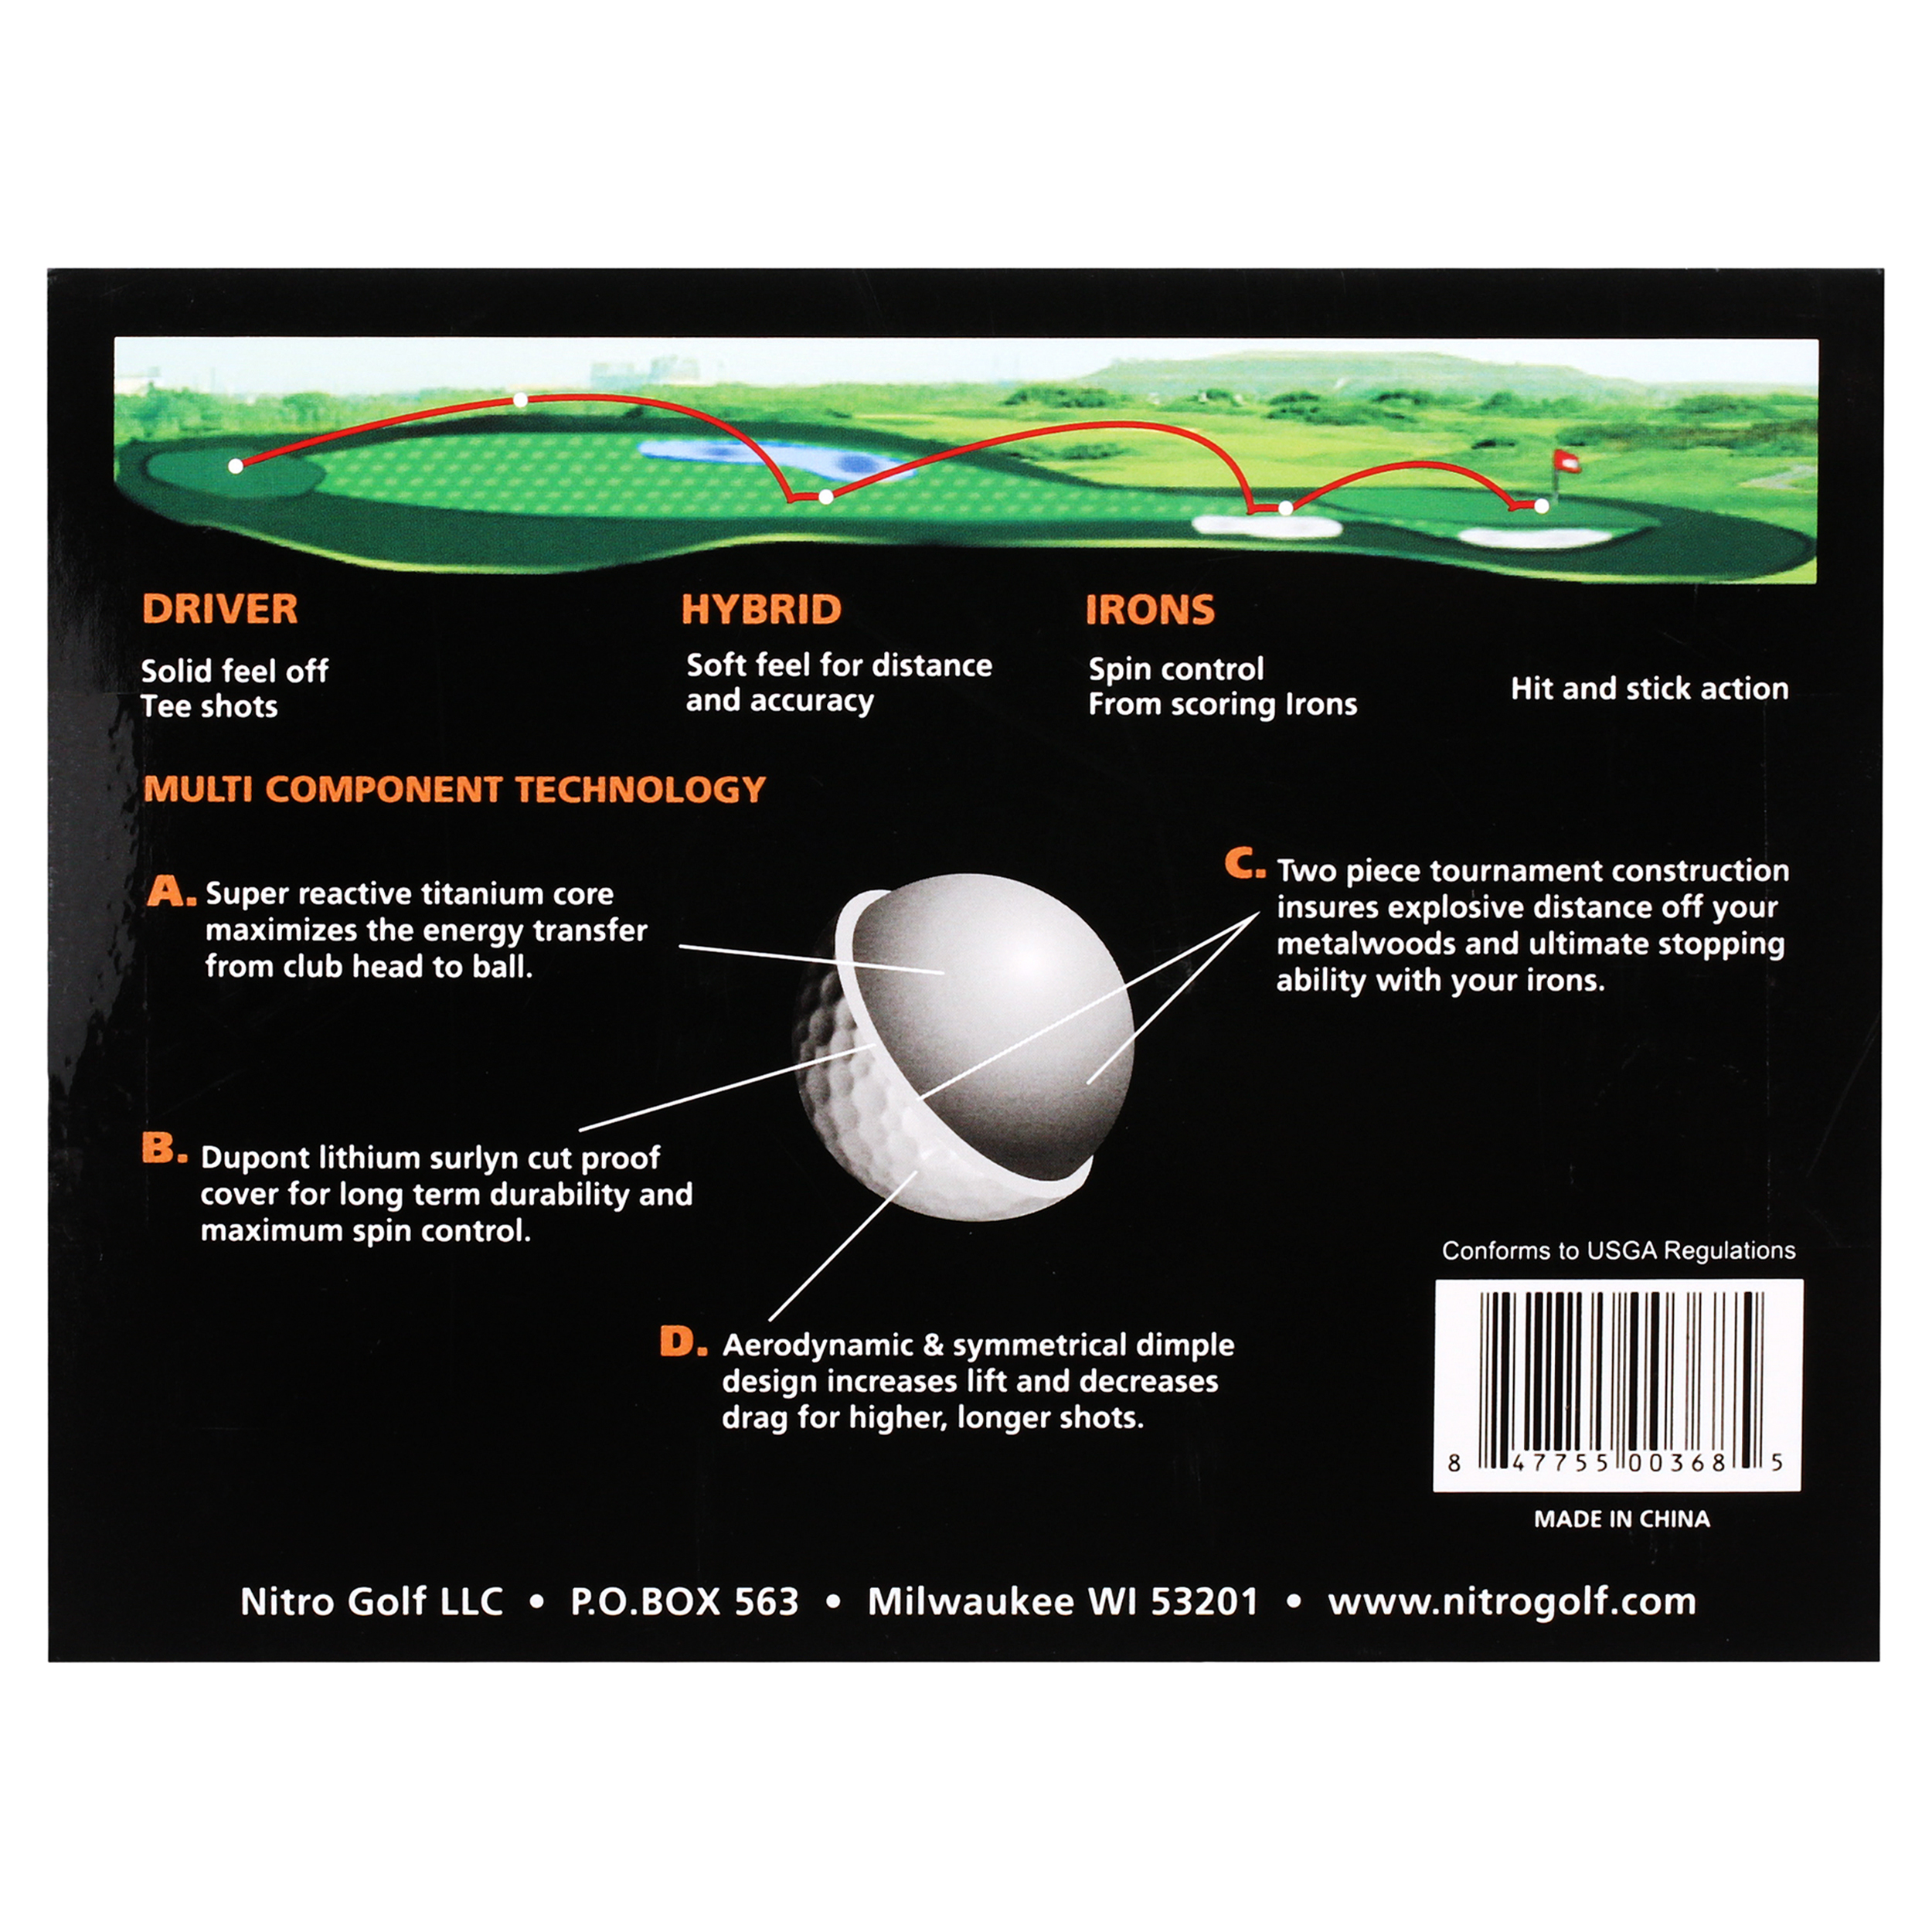 Nitro Golf Ultimate Distance Golf Balls, Yellow, 12 Pack - image 4 of 9